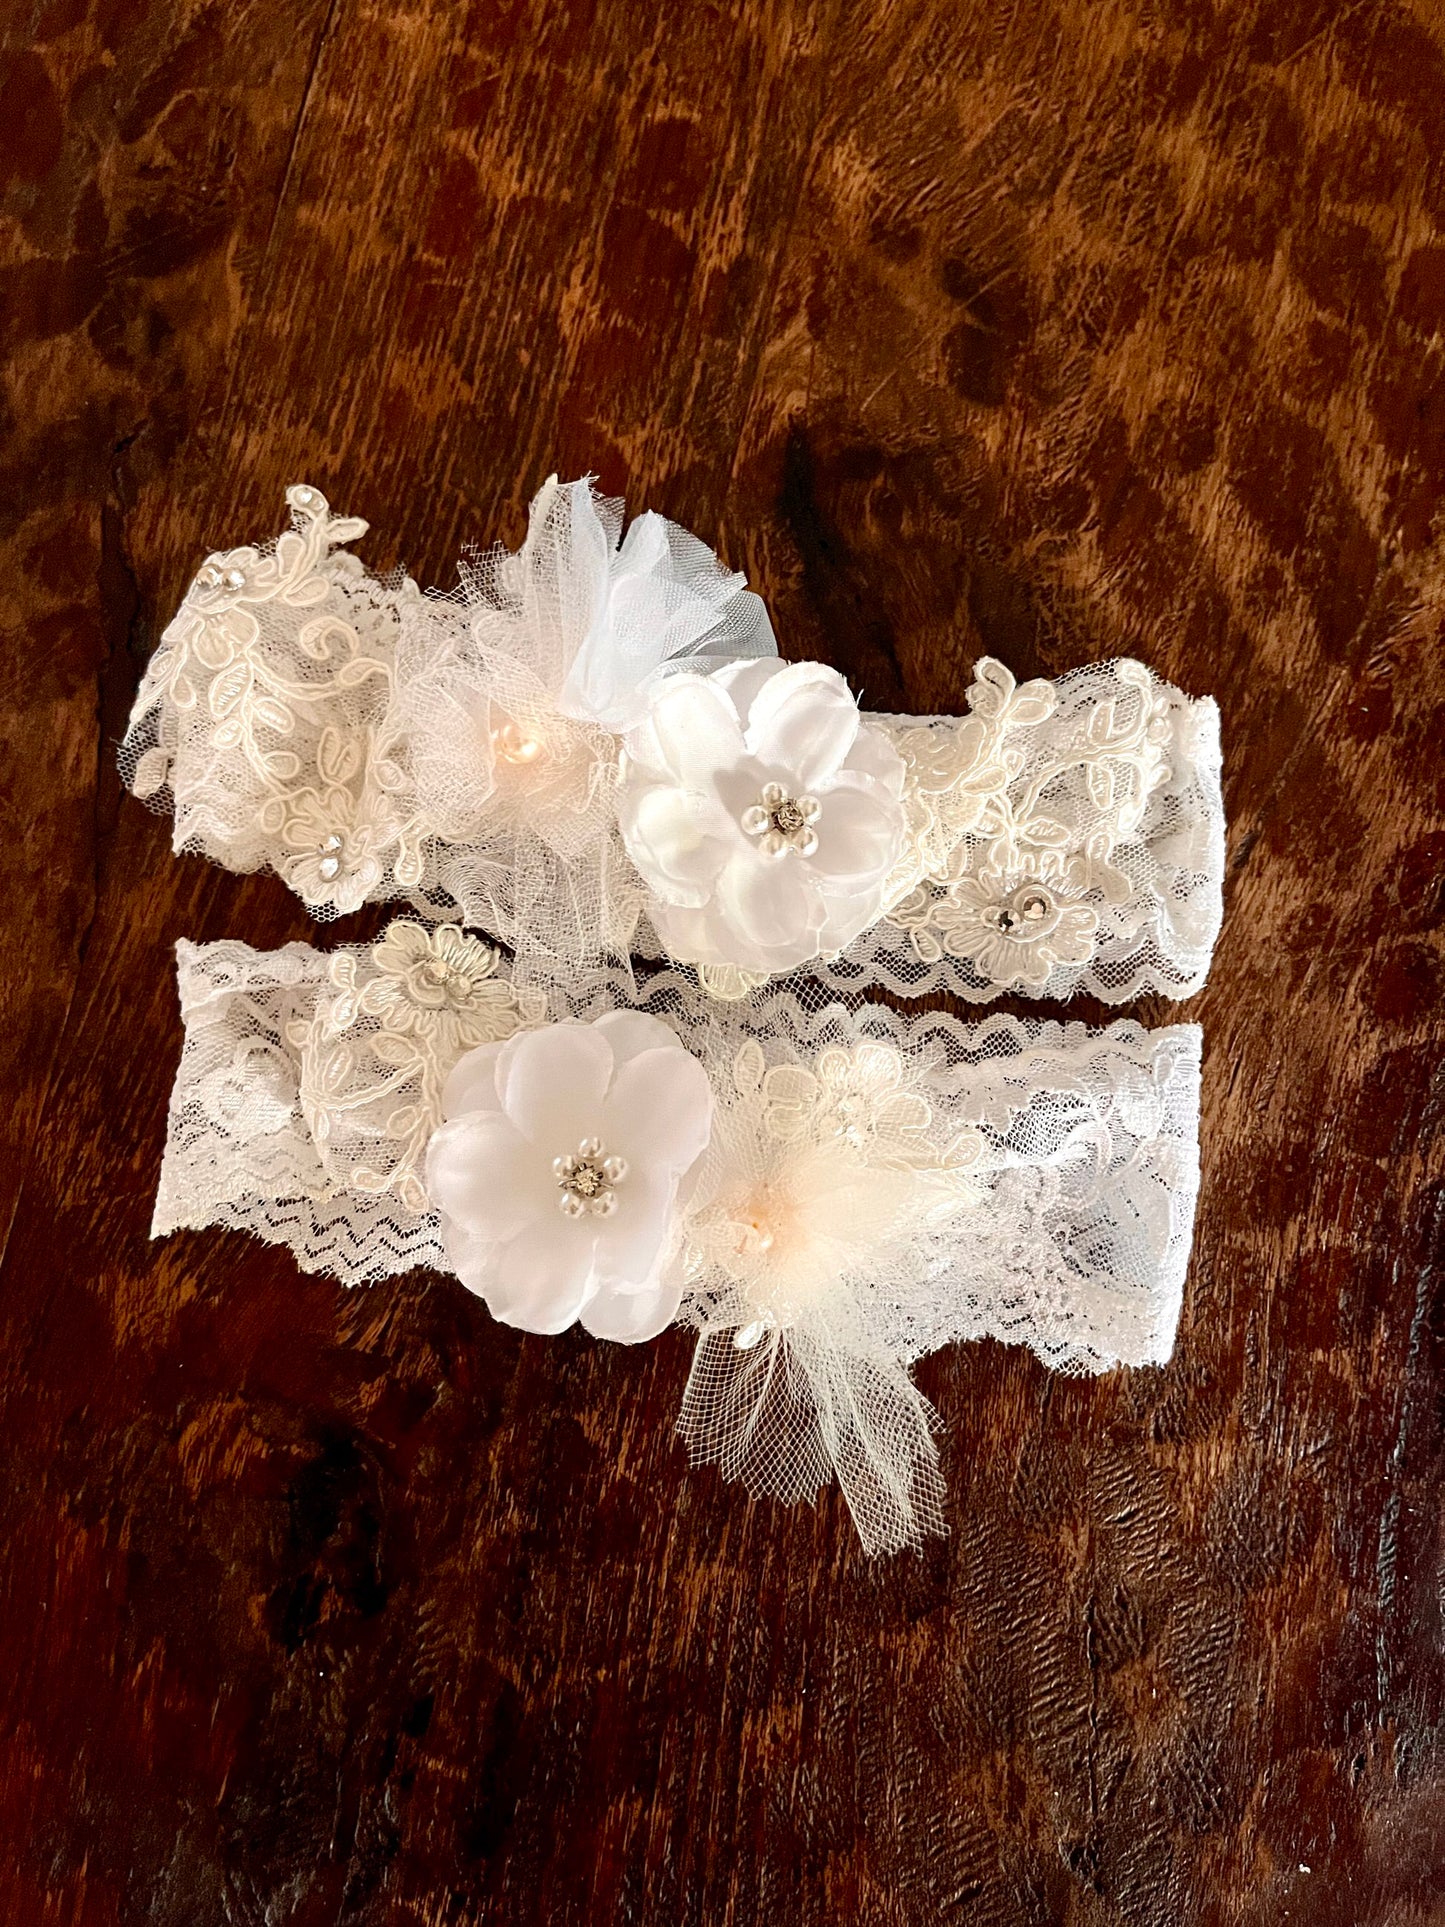 up cycled lace bridal garter set in blush with flowers from mom's vintage wedding dress from the 1970s